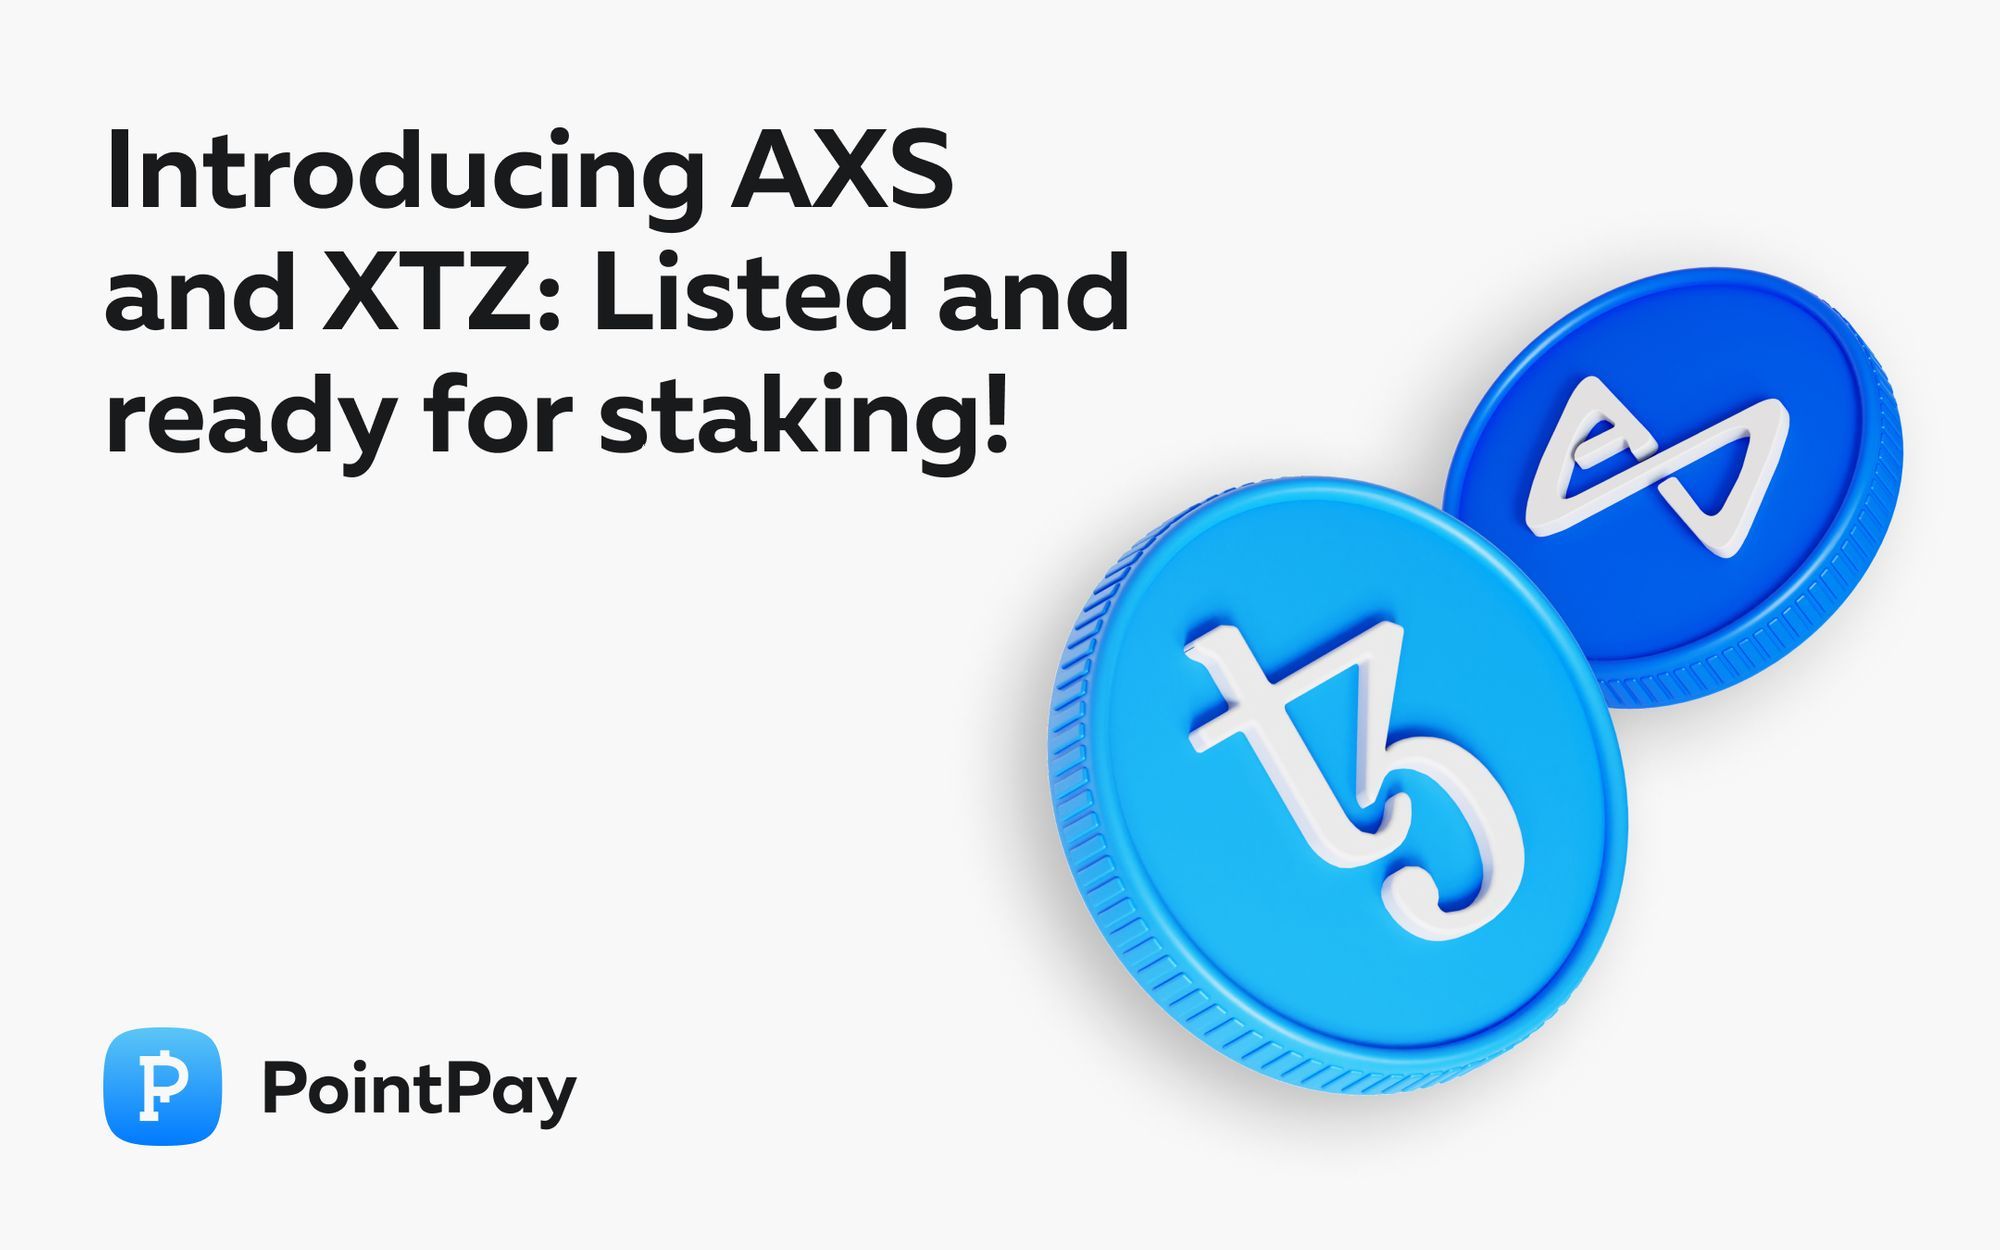 PointPay listing AXS and XTZ with staking capabilities!